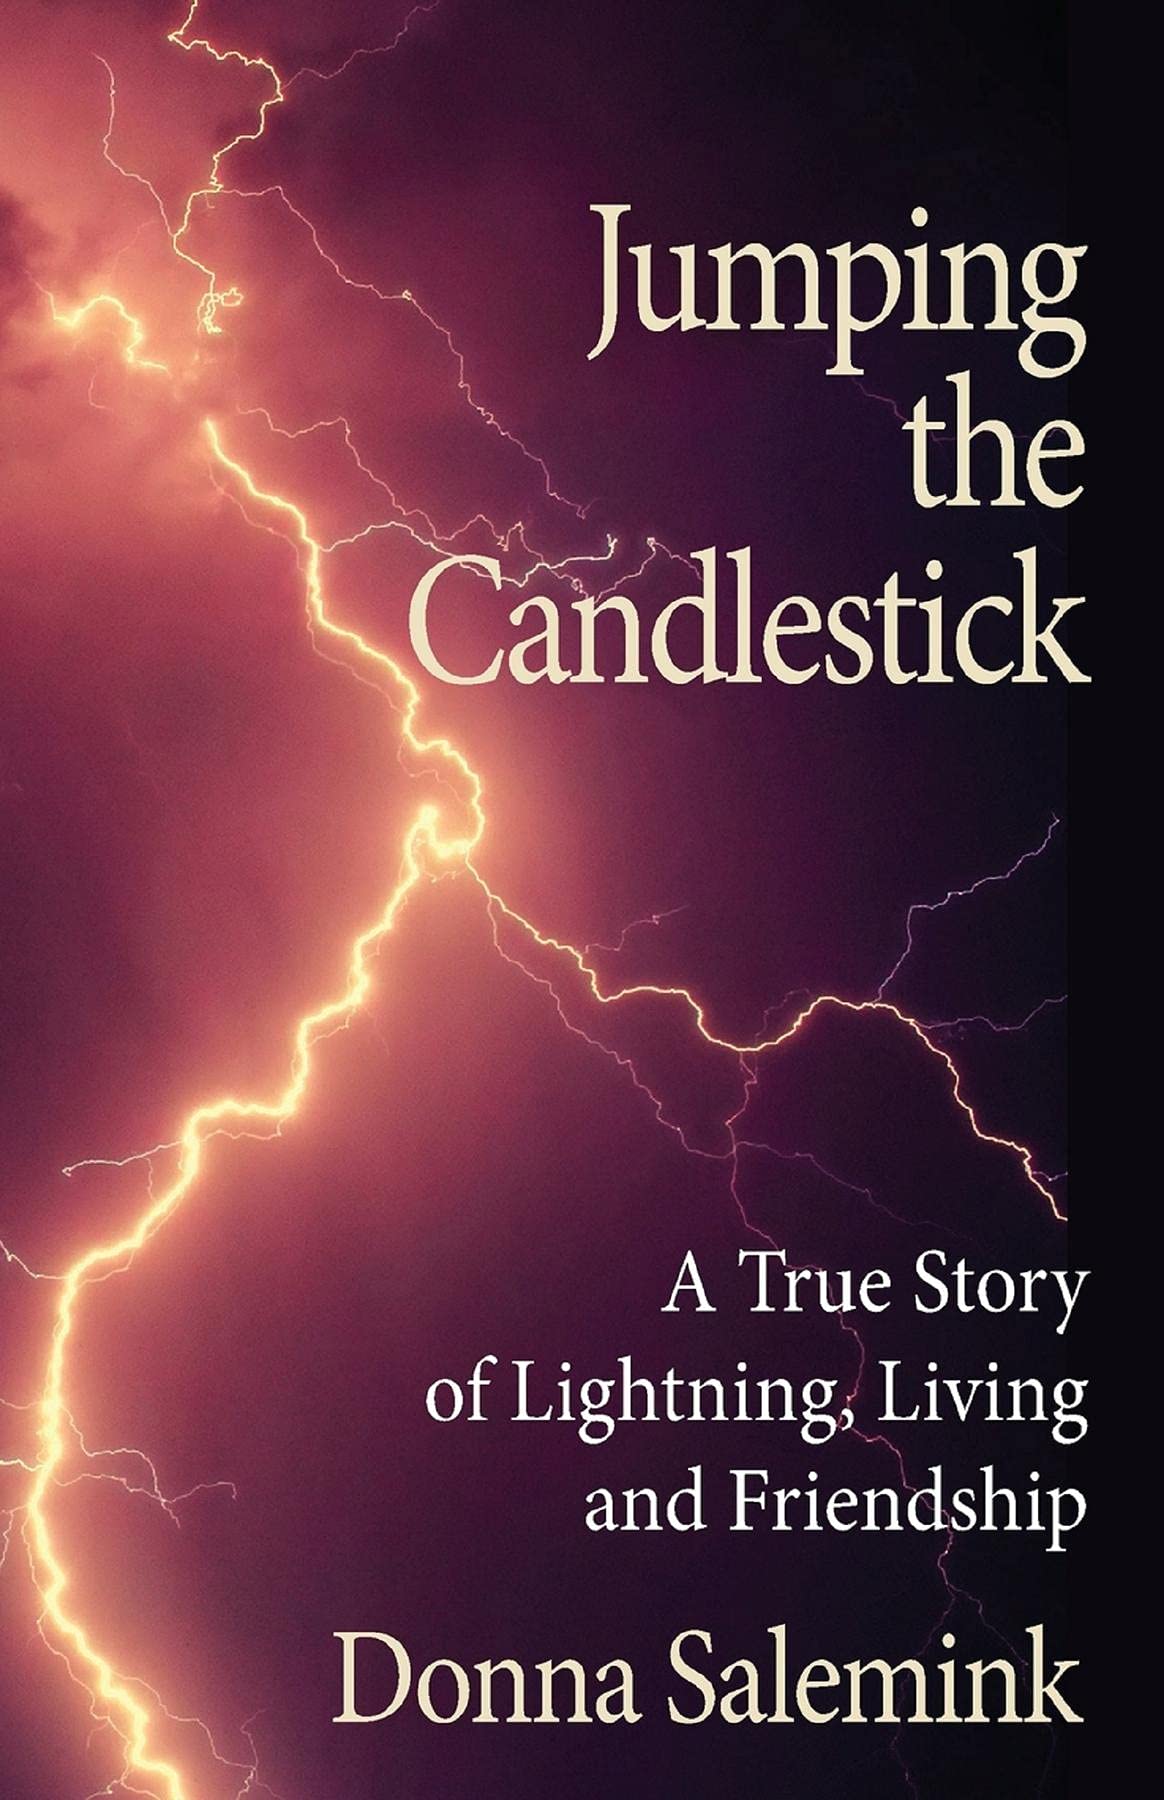 Jumping the Candlestick: A True Story of Lightning, Living & Friendship